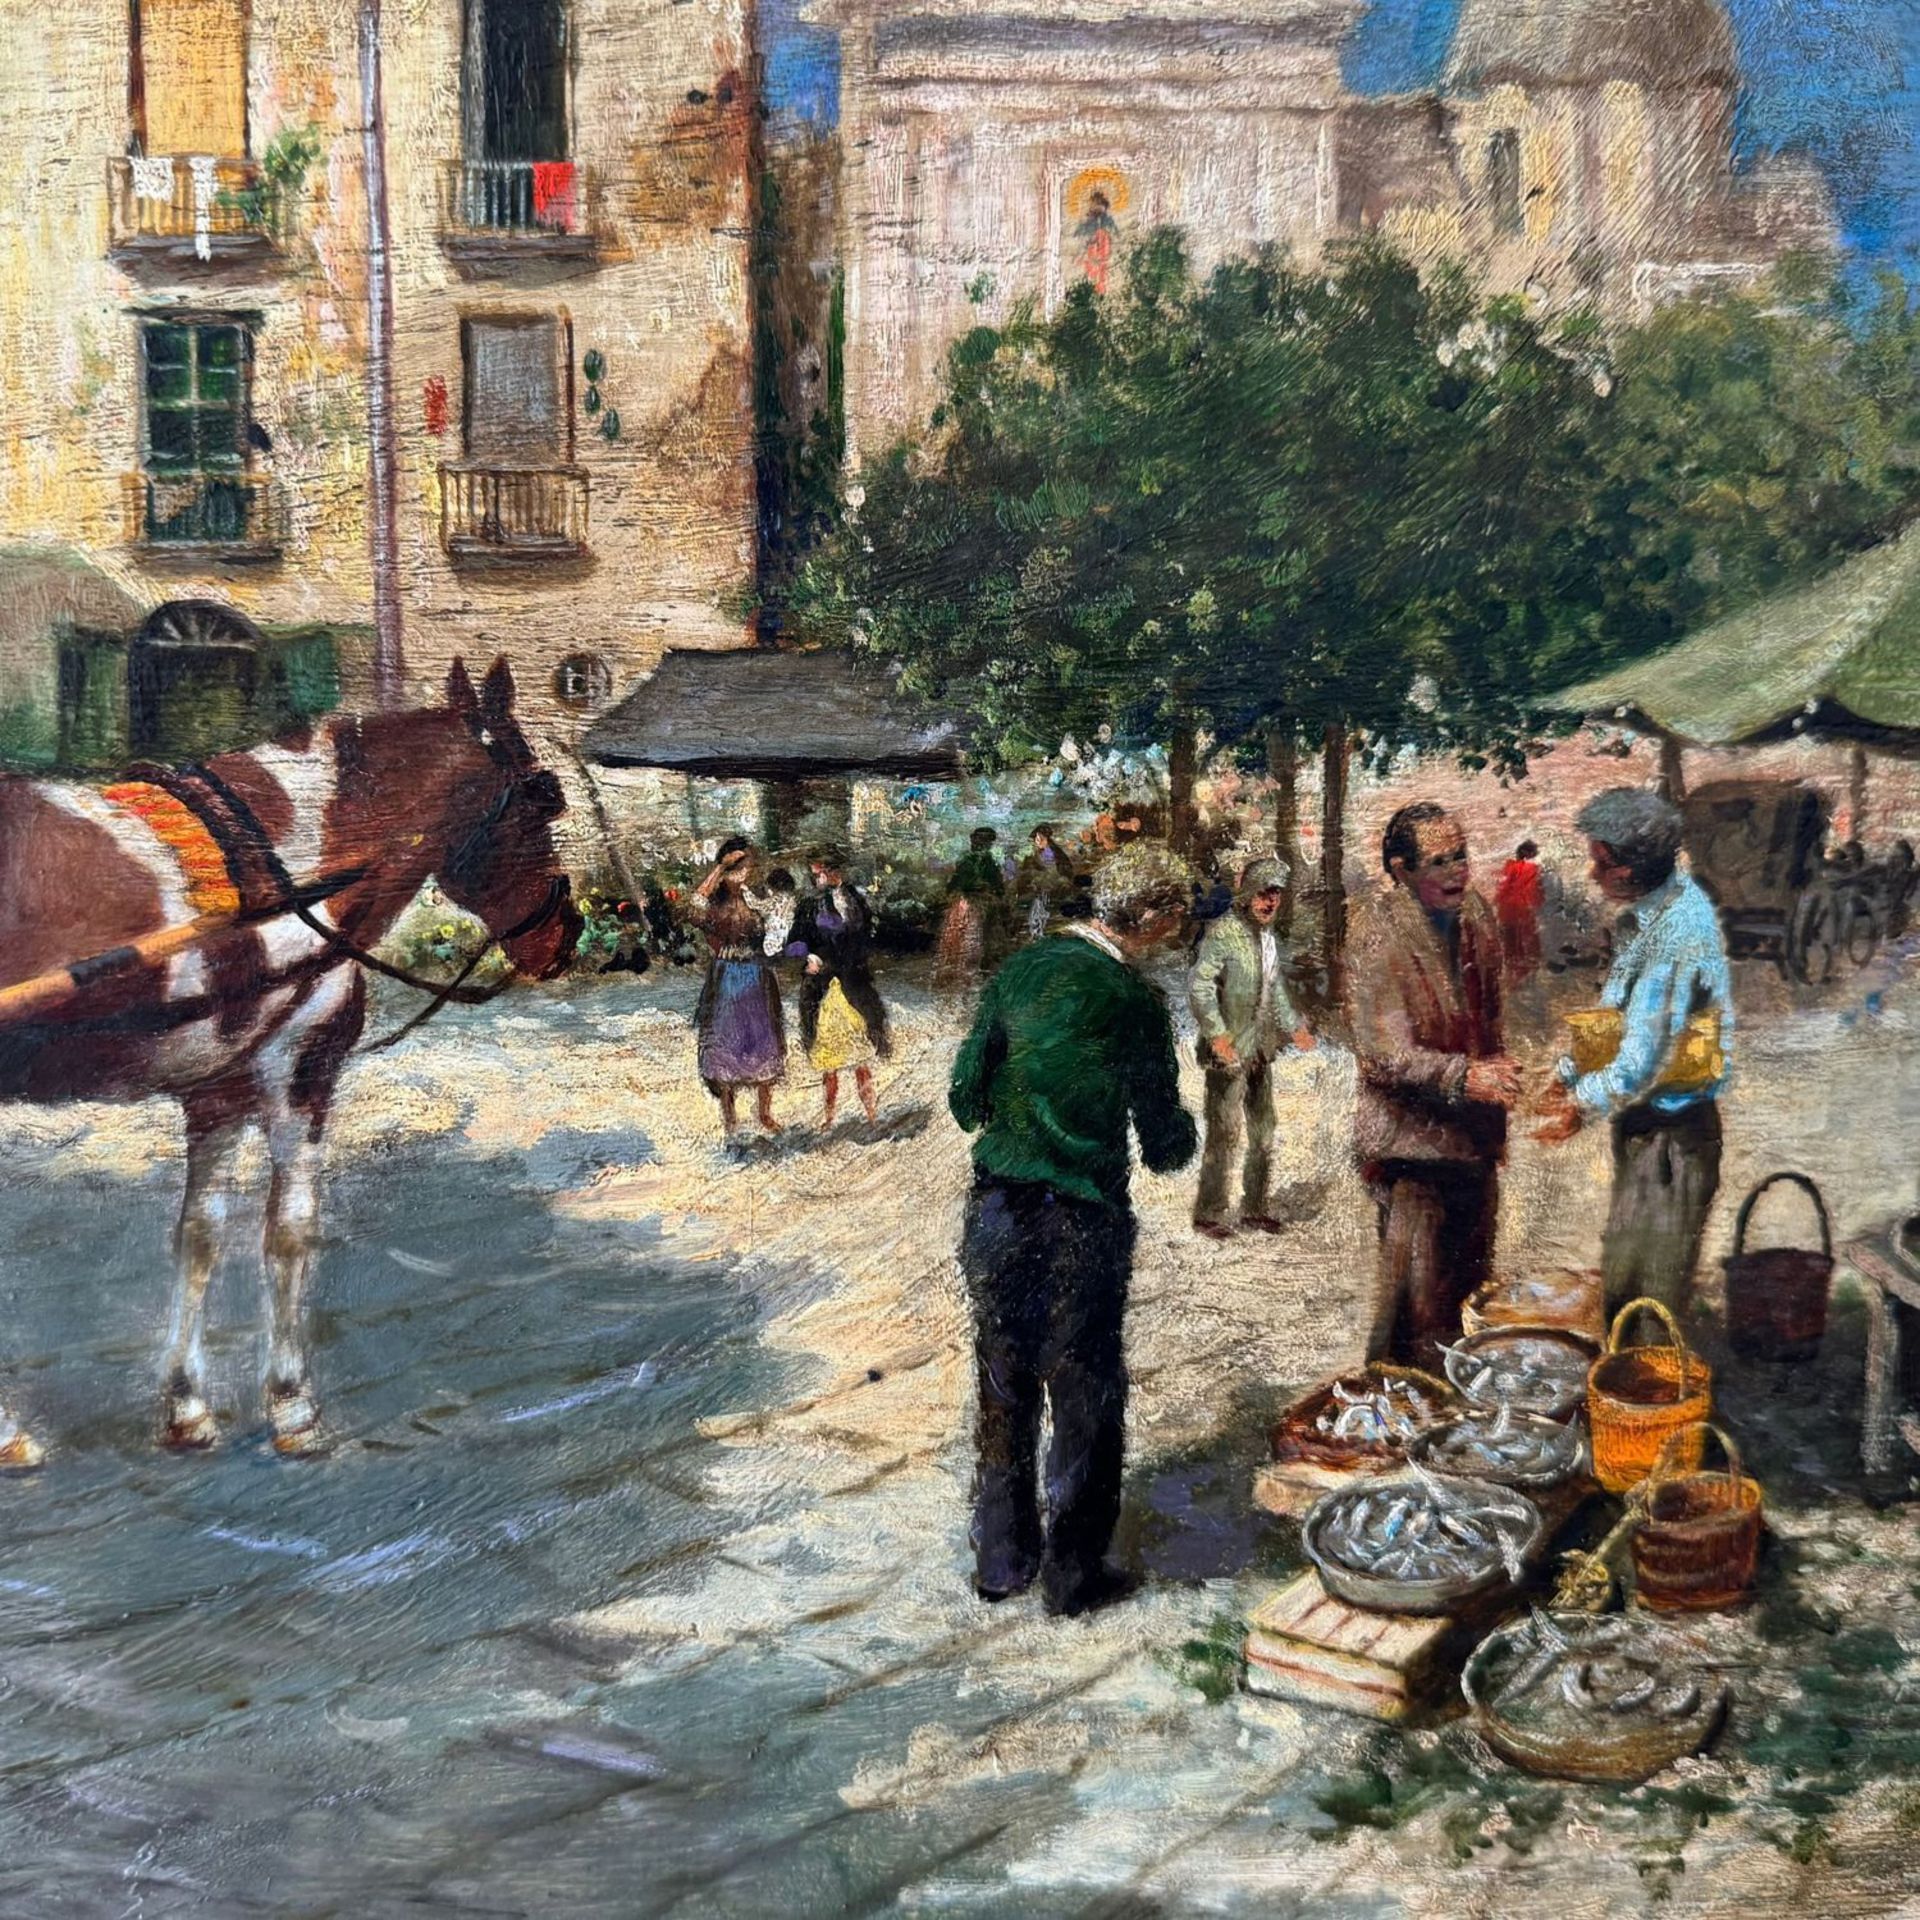 Neapolitan street with carriage and characters - E. Cerrone (1935 - 2010) - Image 3 of 7